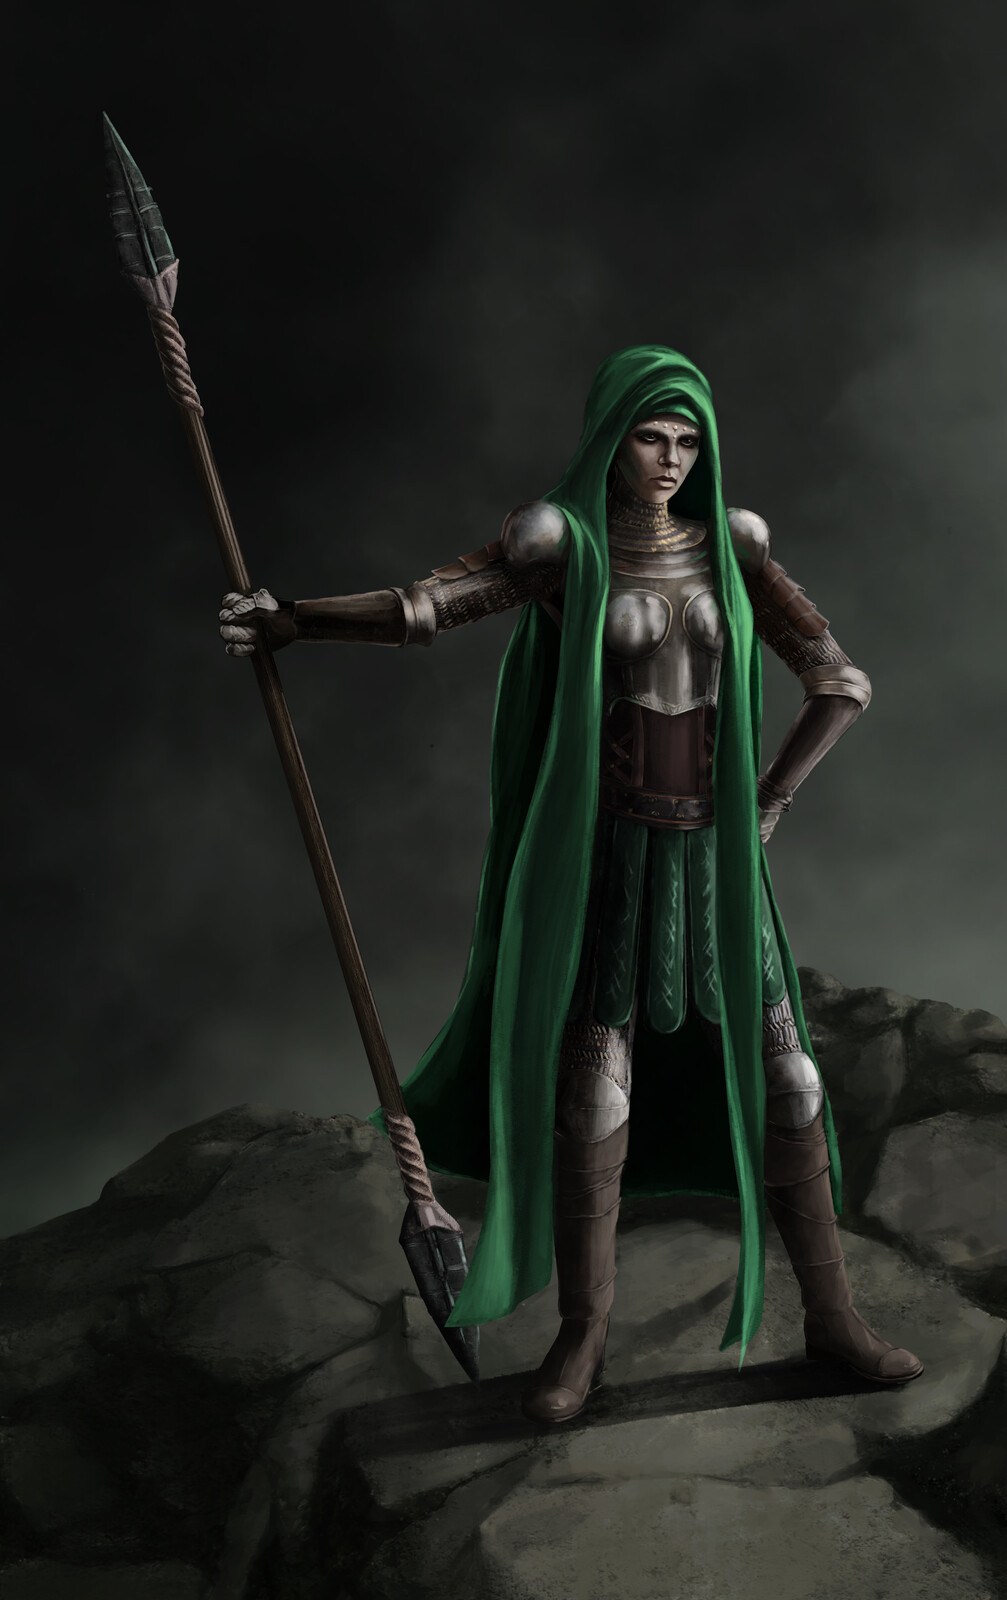 Warrior in green clothing